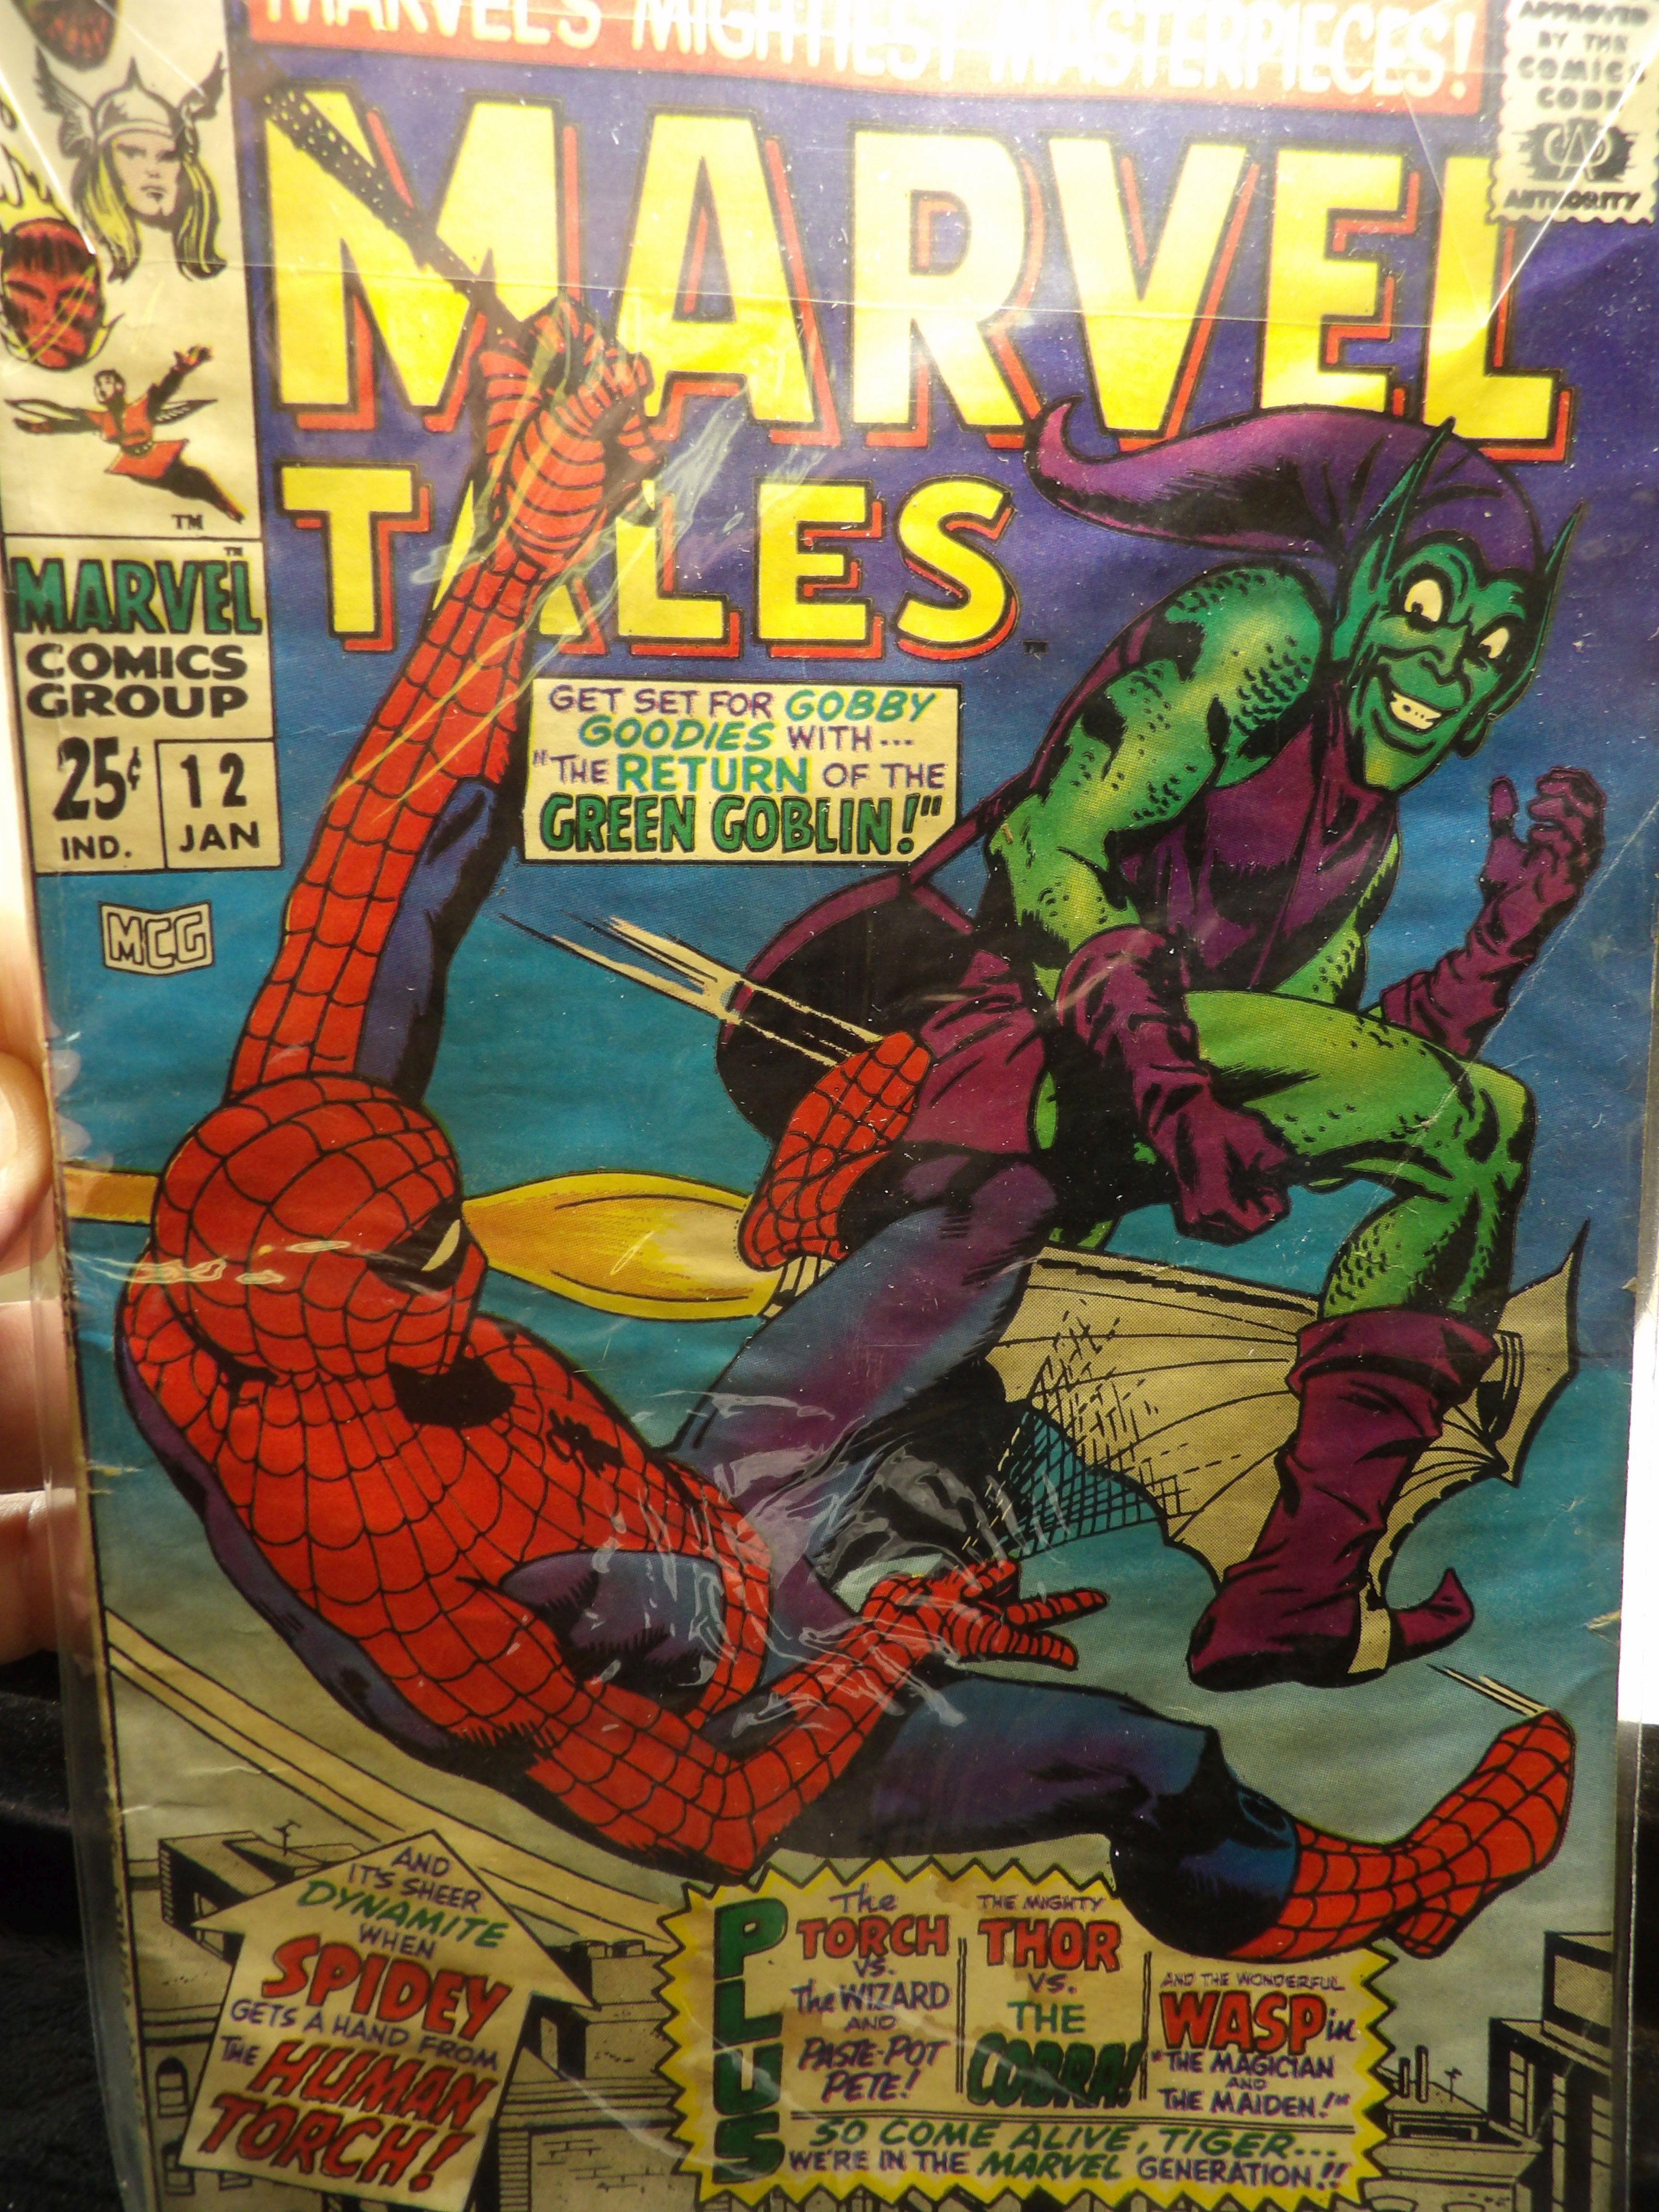 Marvel Tales No. 12 Comic Book with Spiderman & the Human Torch.